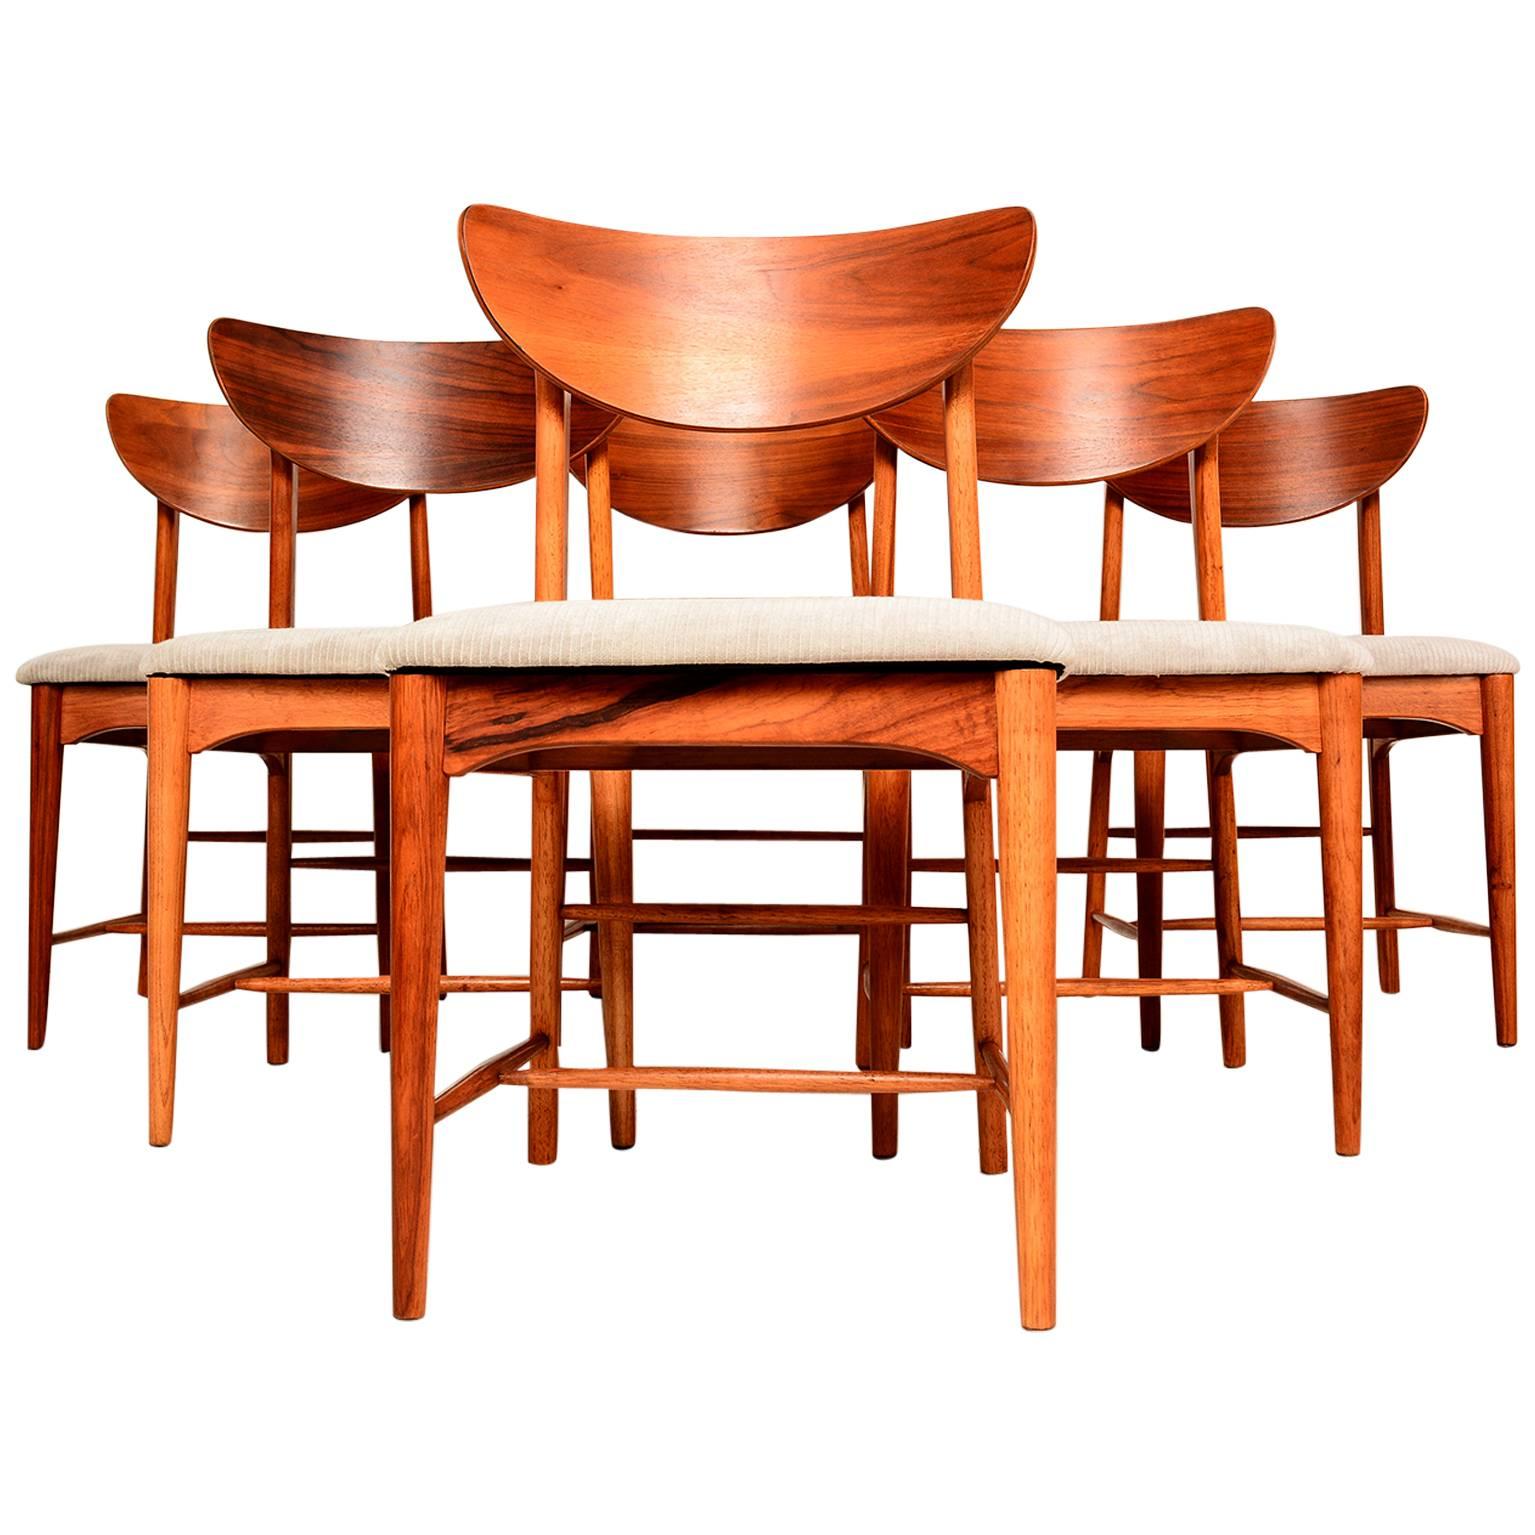 Mid-Century Modern Set of Six Dining Chairs